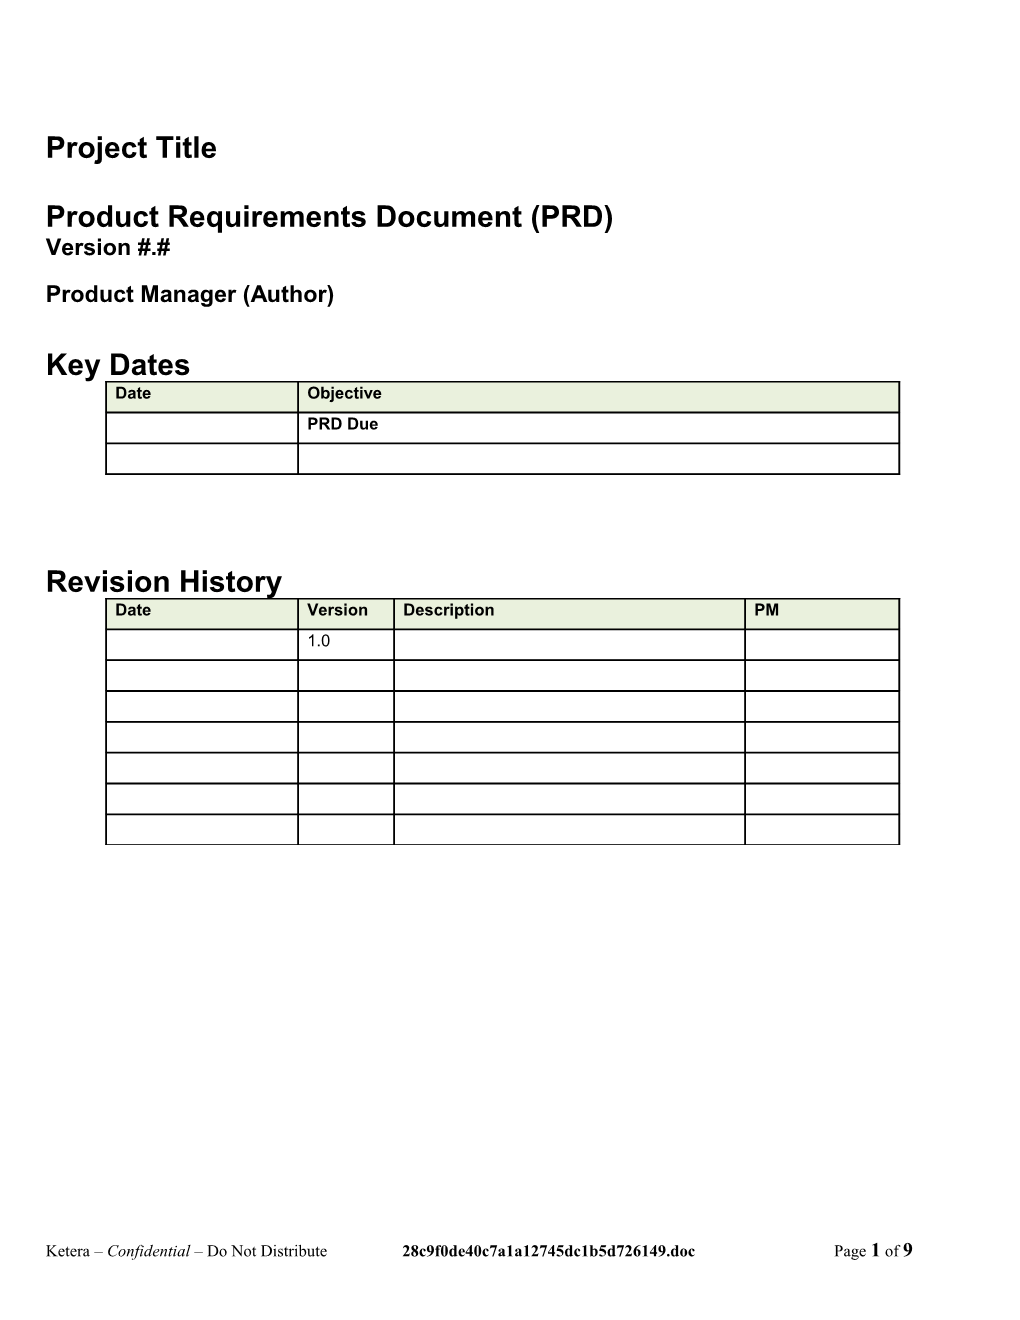 Product Requirements Document (PRD)